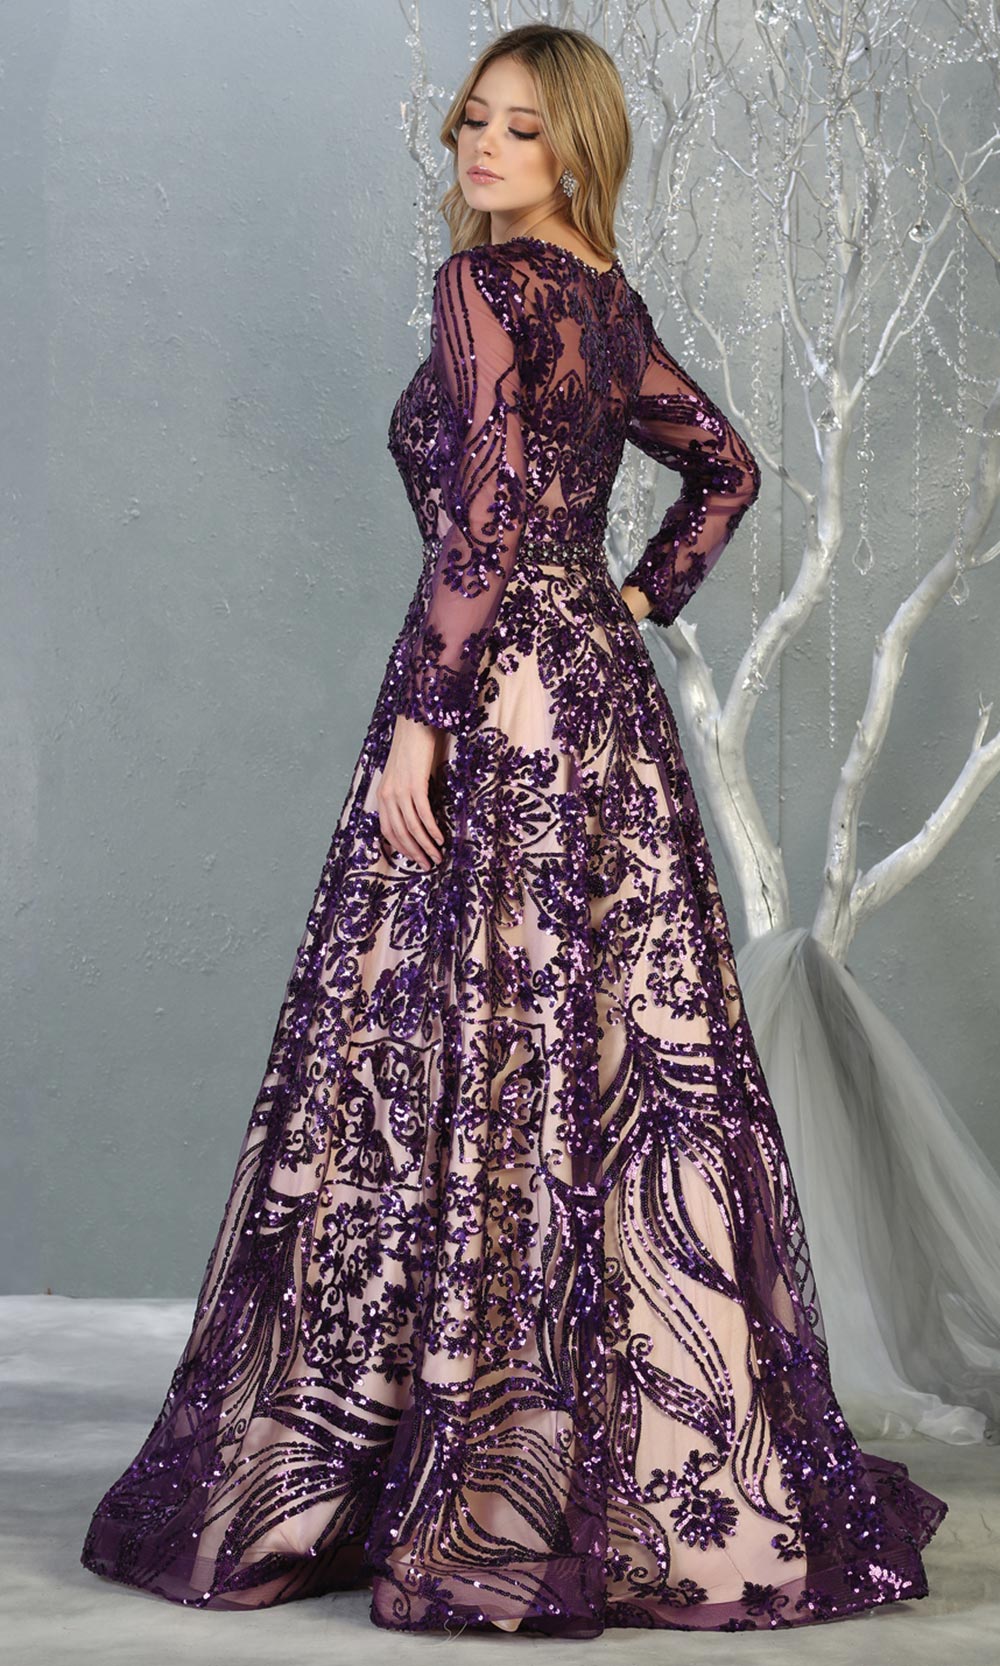 Mayqueen RQ7832 long eggplant modest evening dress w/long sleeves. Full length dark purple flowy gown is perfect for  enagagement/e-shoot dress, formal wedding guest, evening party dress, prom, engagement, wedding reception. Plus sizes avail-b.jpg